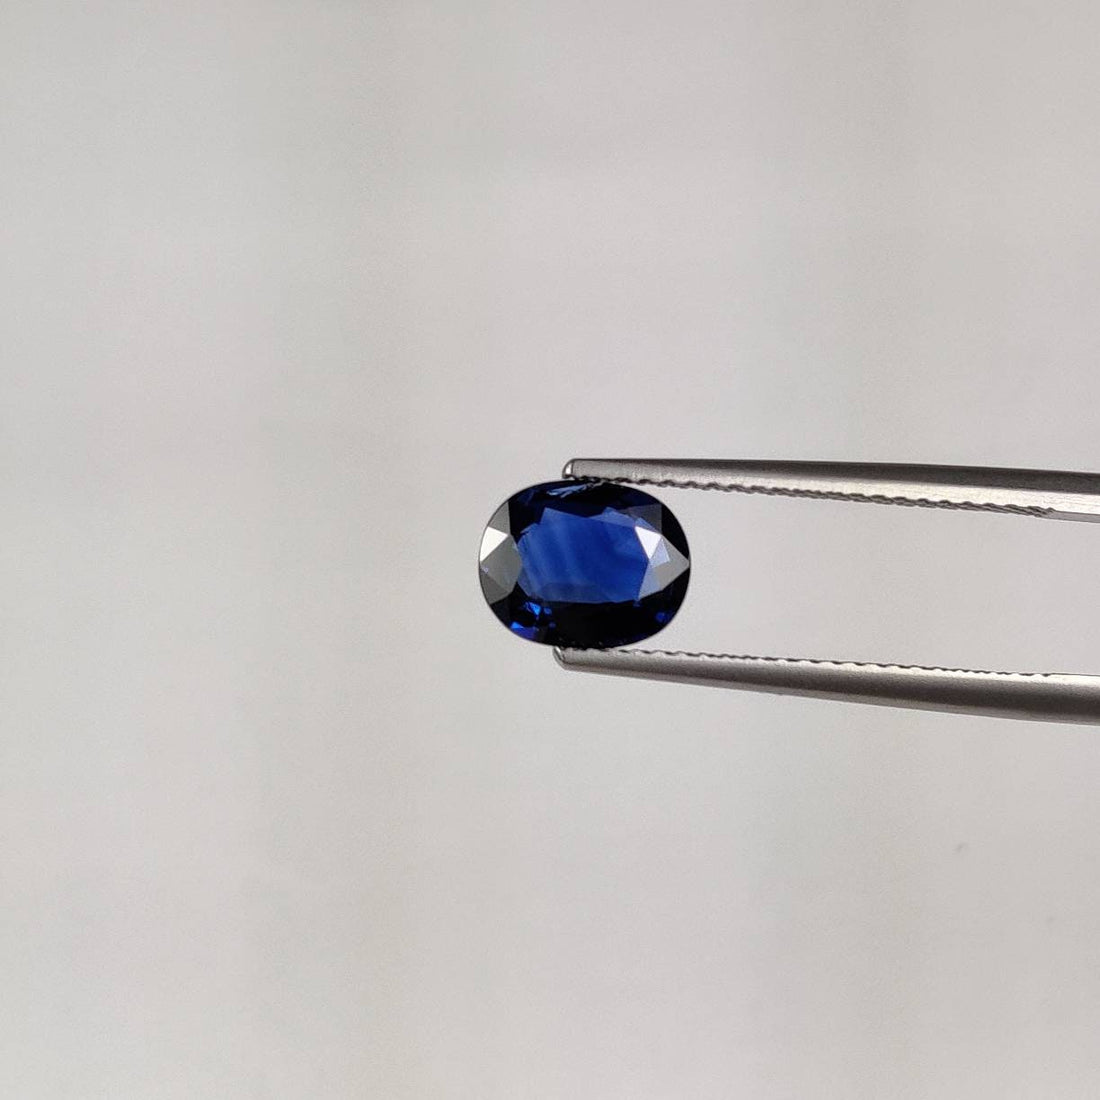 1.36 cts Unheated Natural Blue Sapphire Loose Gemstone Oval Cut Certified